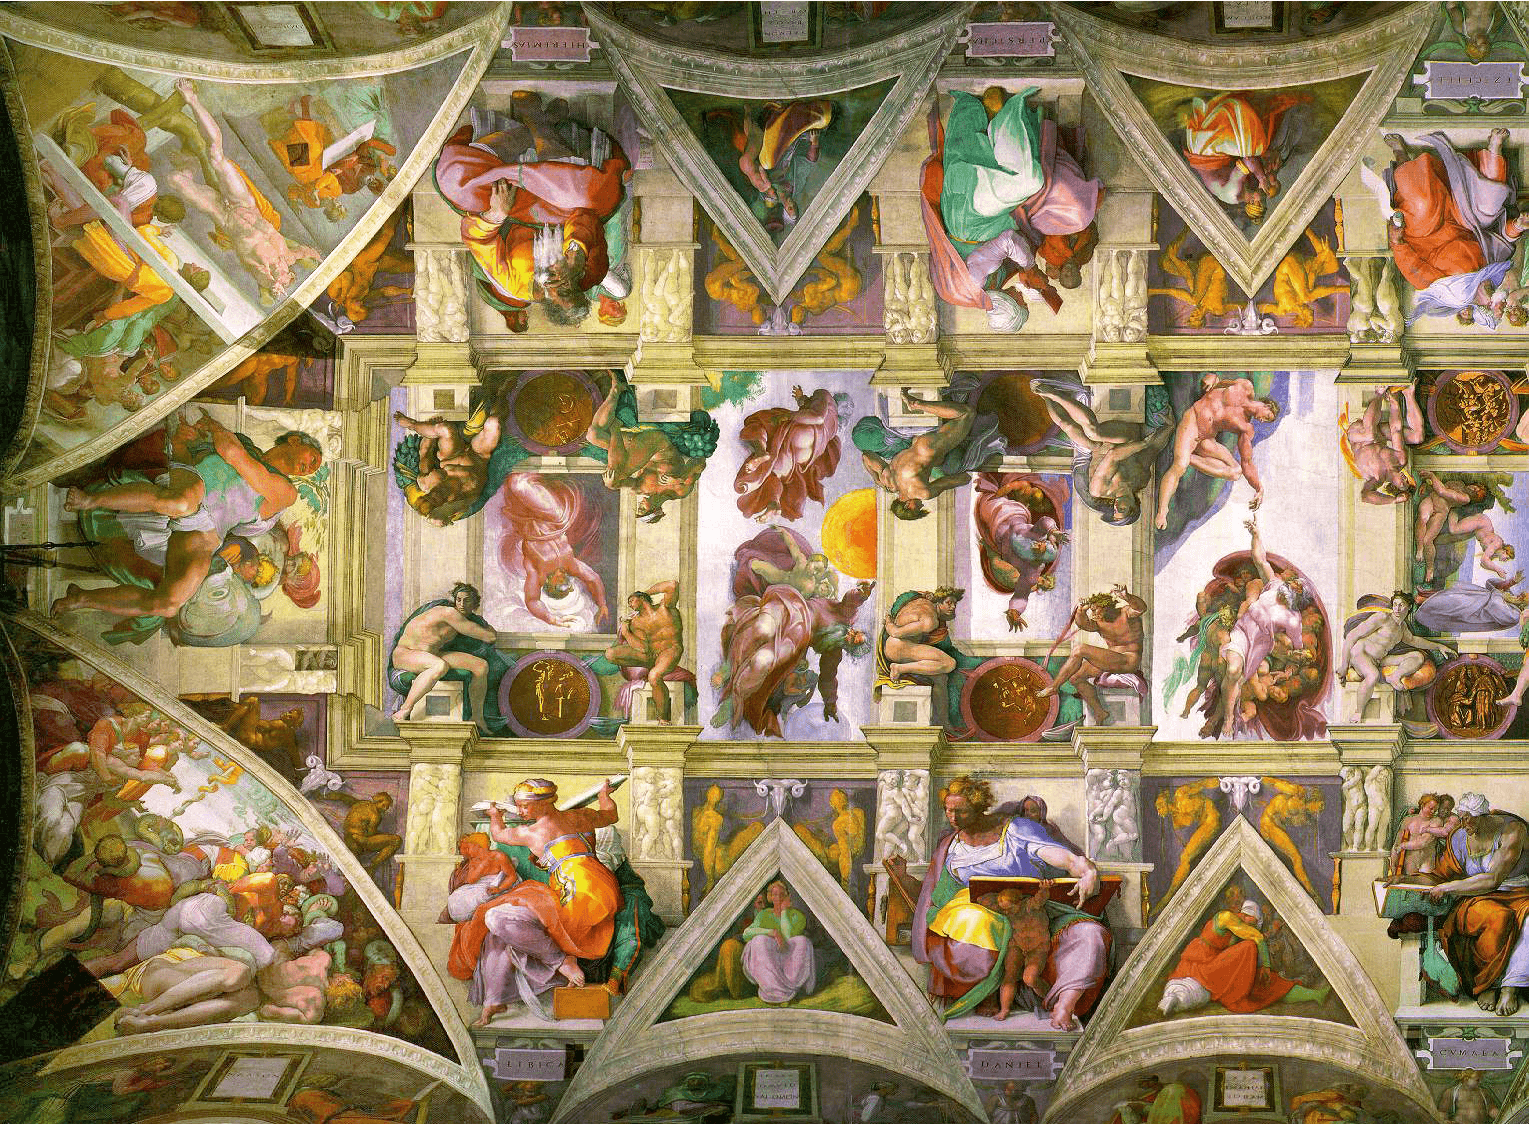 The Agony and the Ecstasy Michelangelo’s Sistine Chapel ceiling